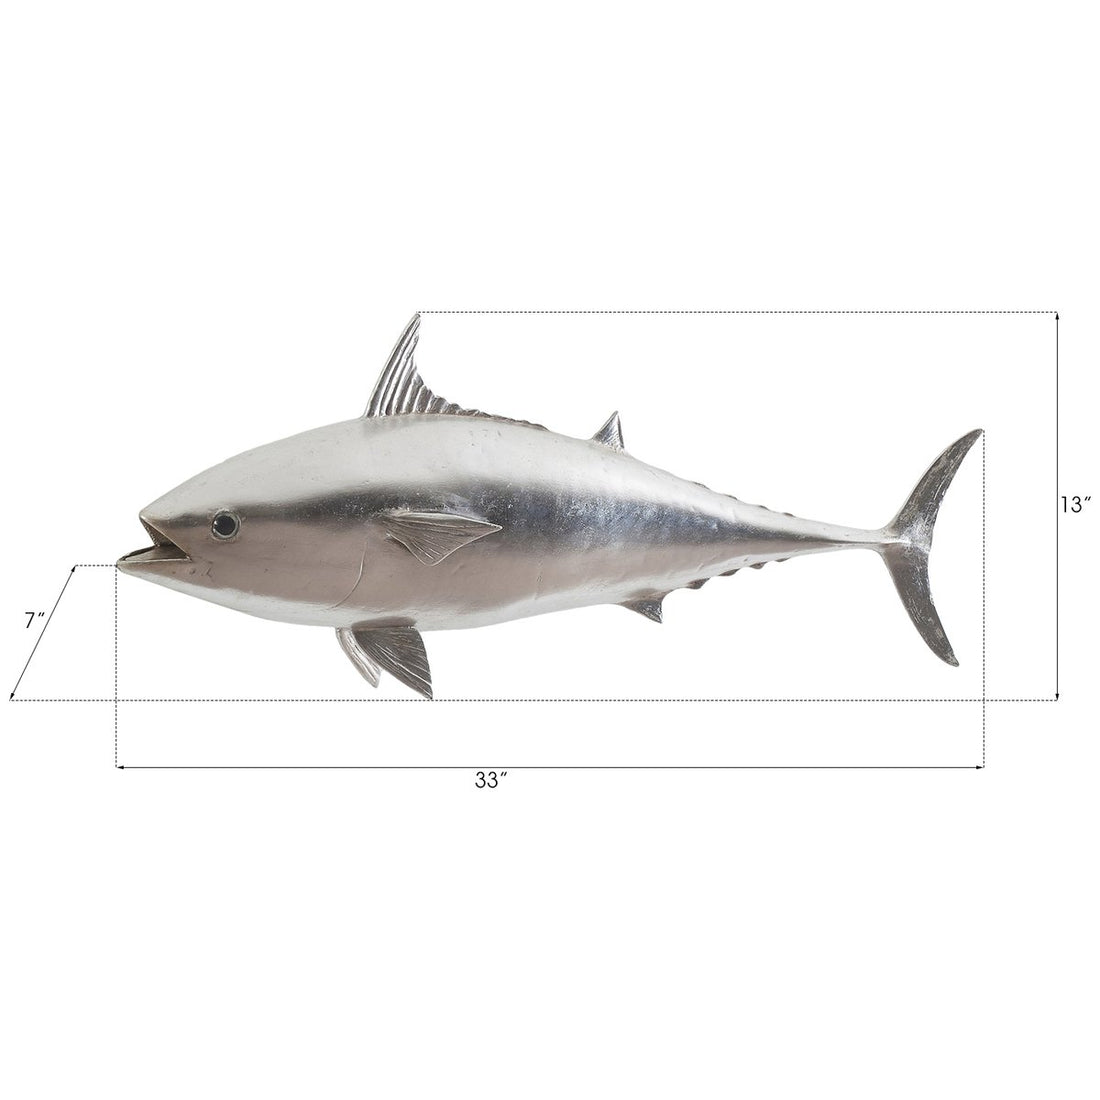 Phillips Collection Mackerel Fish Wall Sculpture, Silver Leaf